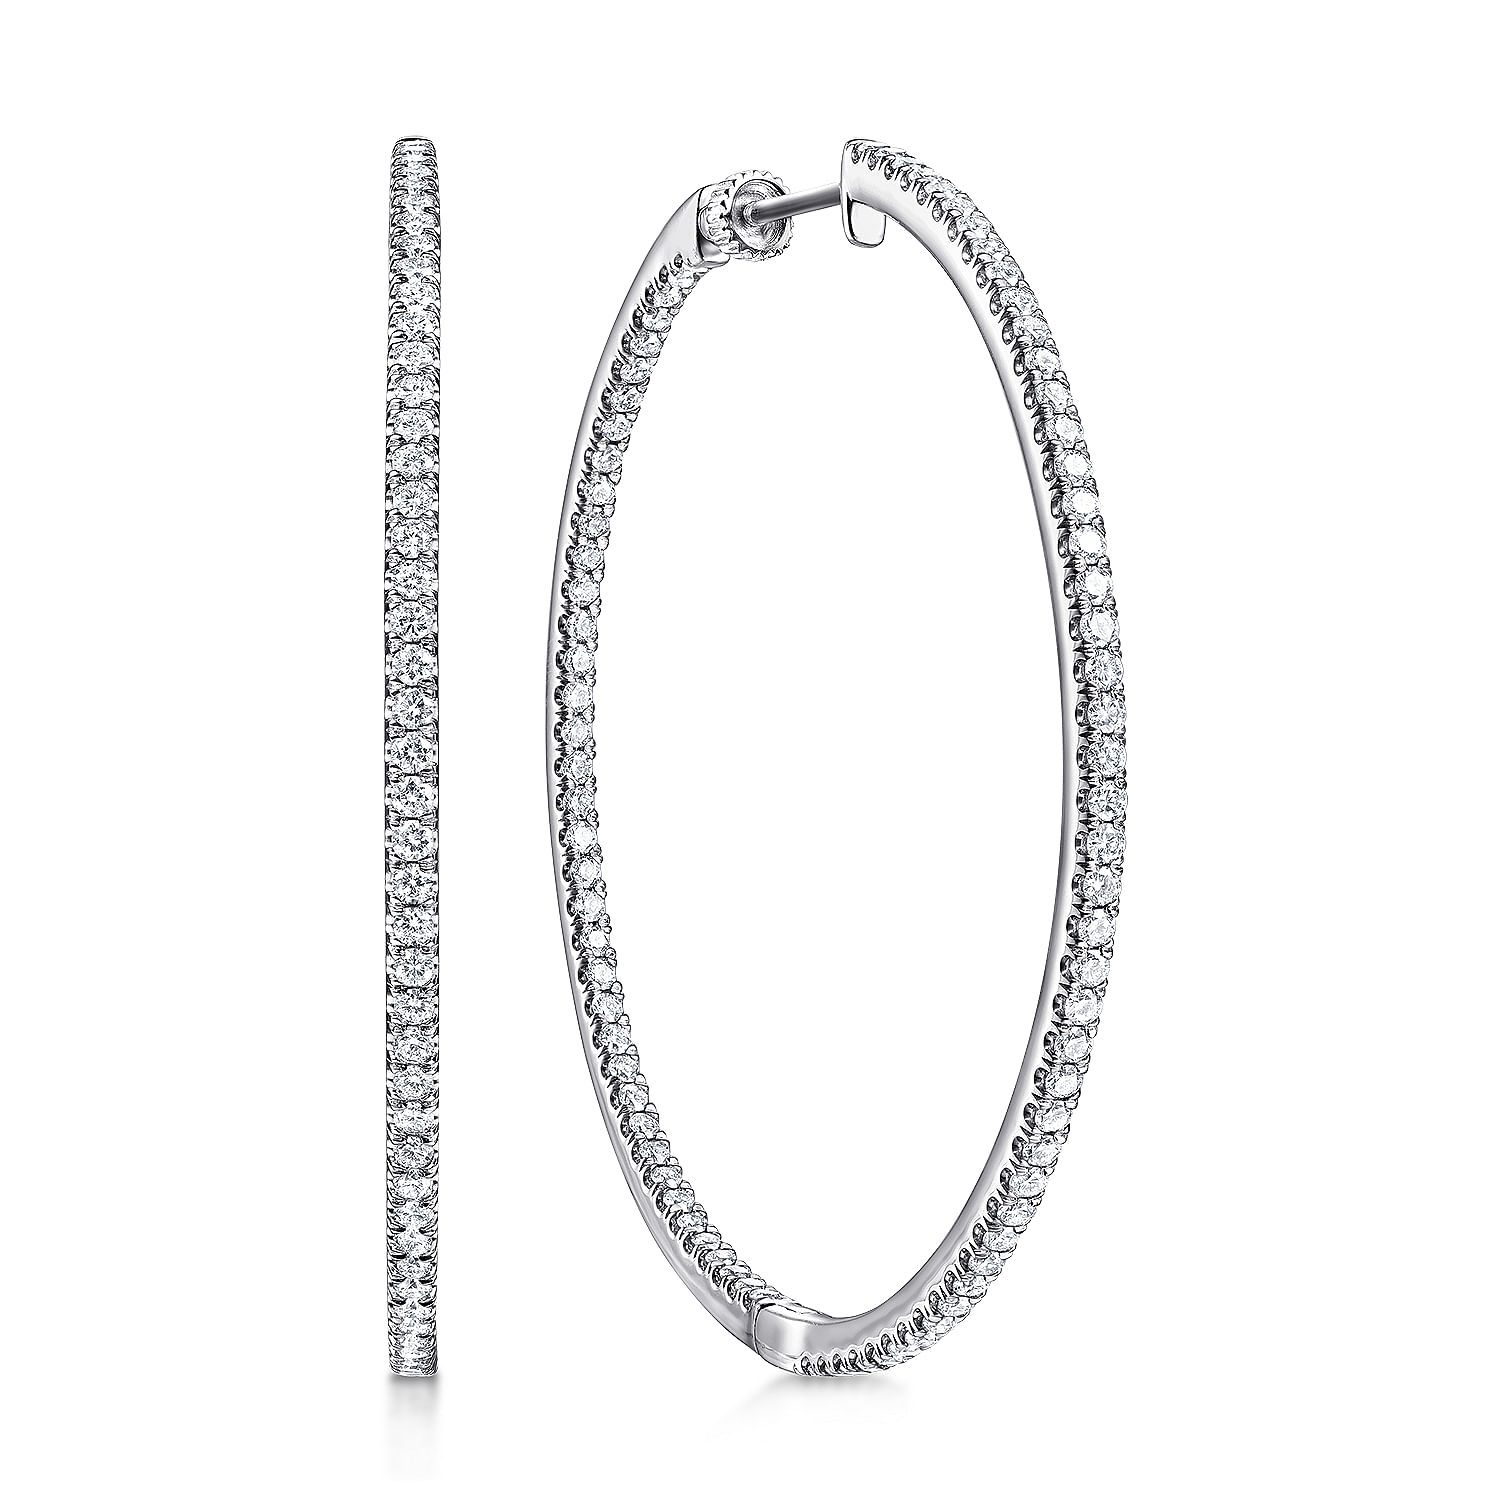 14K White Gold French Pave 50mm Round Inside Out Diamond Hoop Earrings